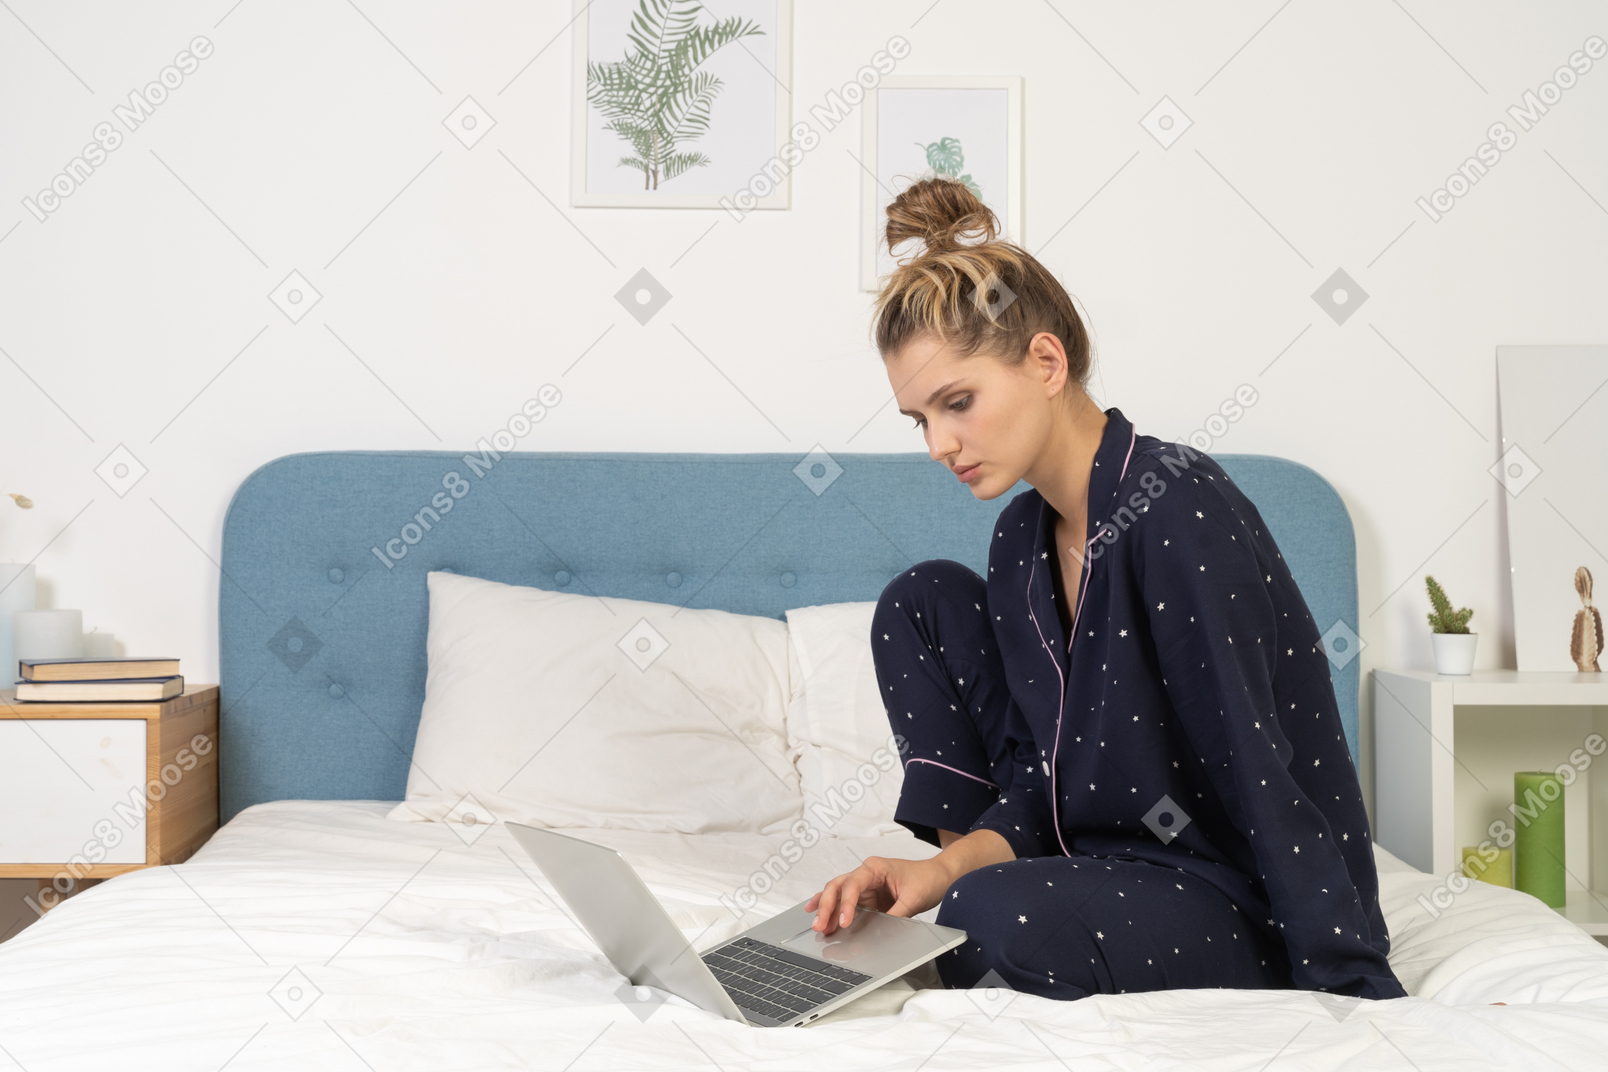 Side view of a young female sitting in bed with her laptop